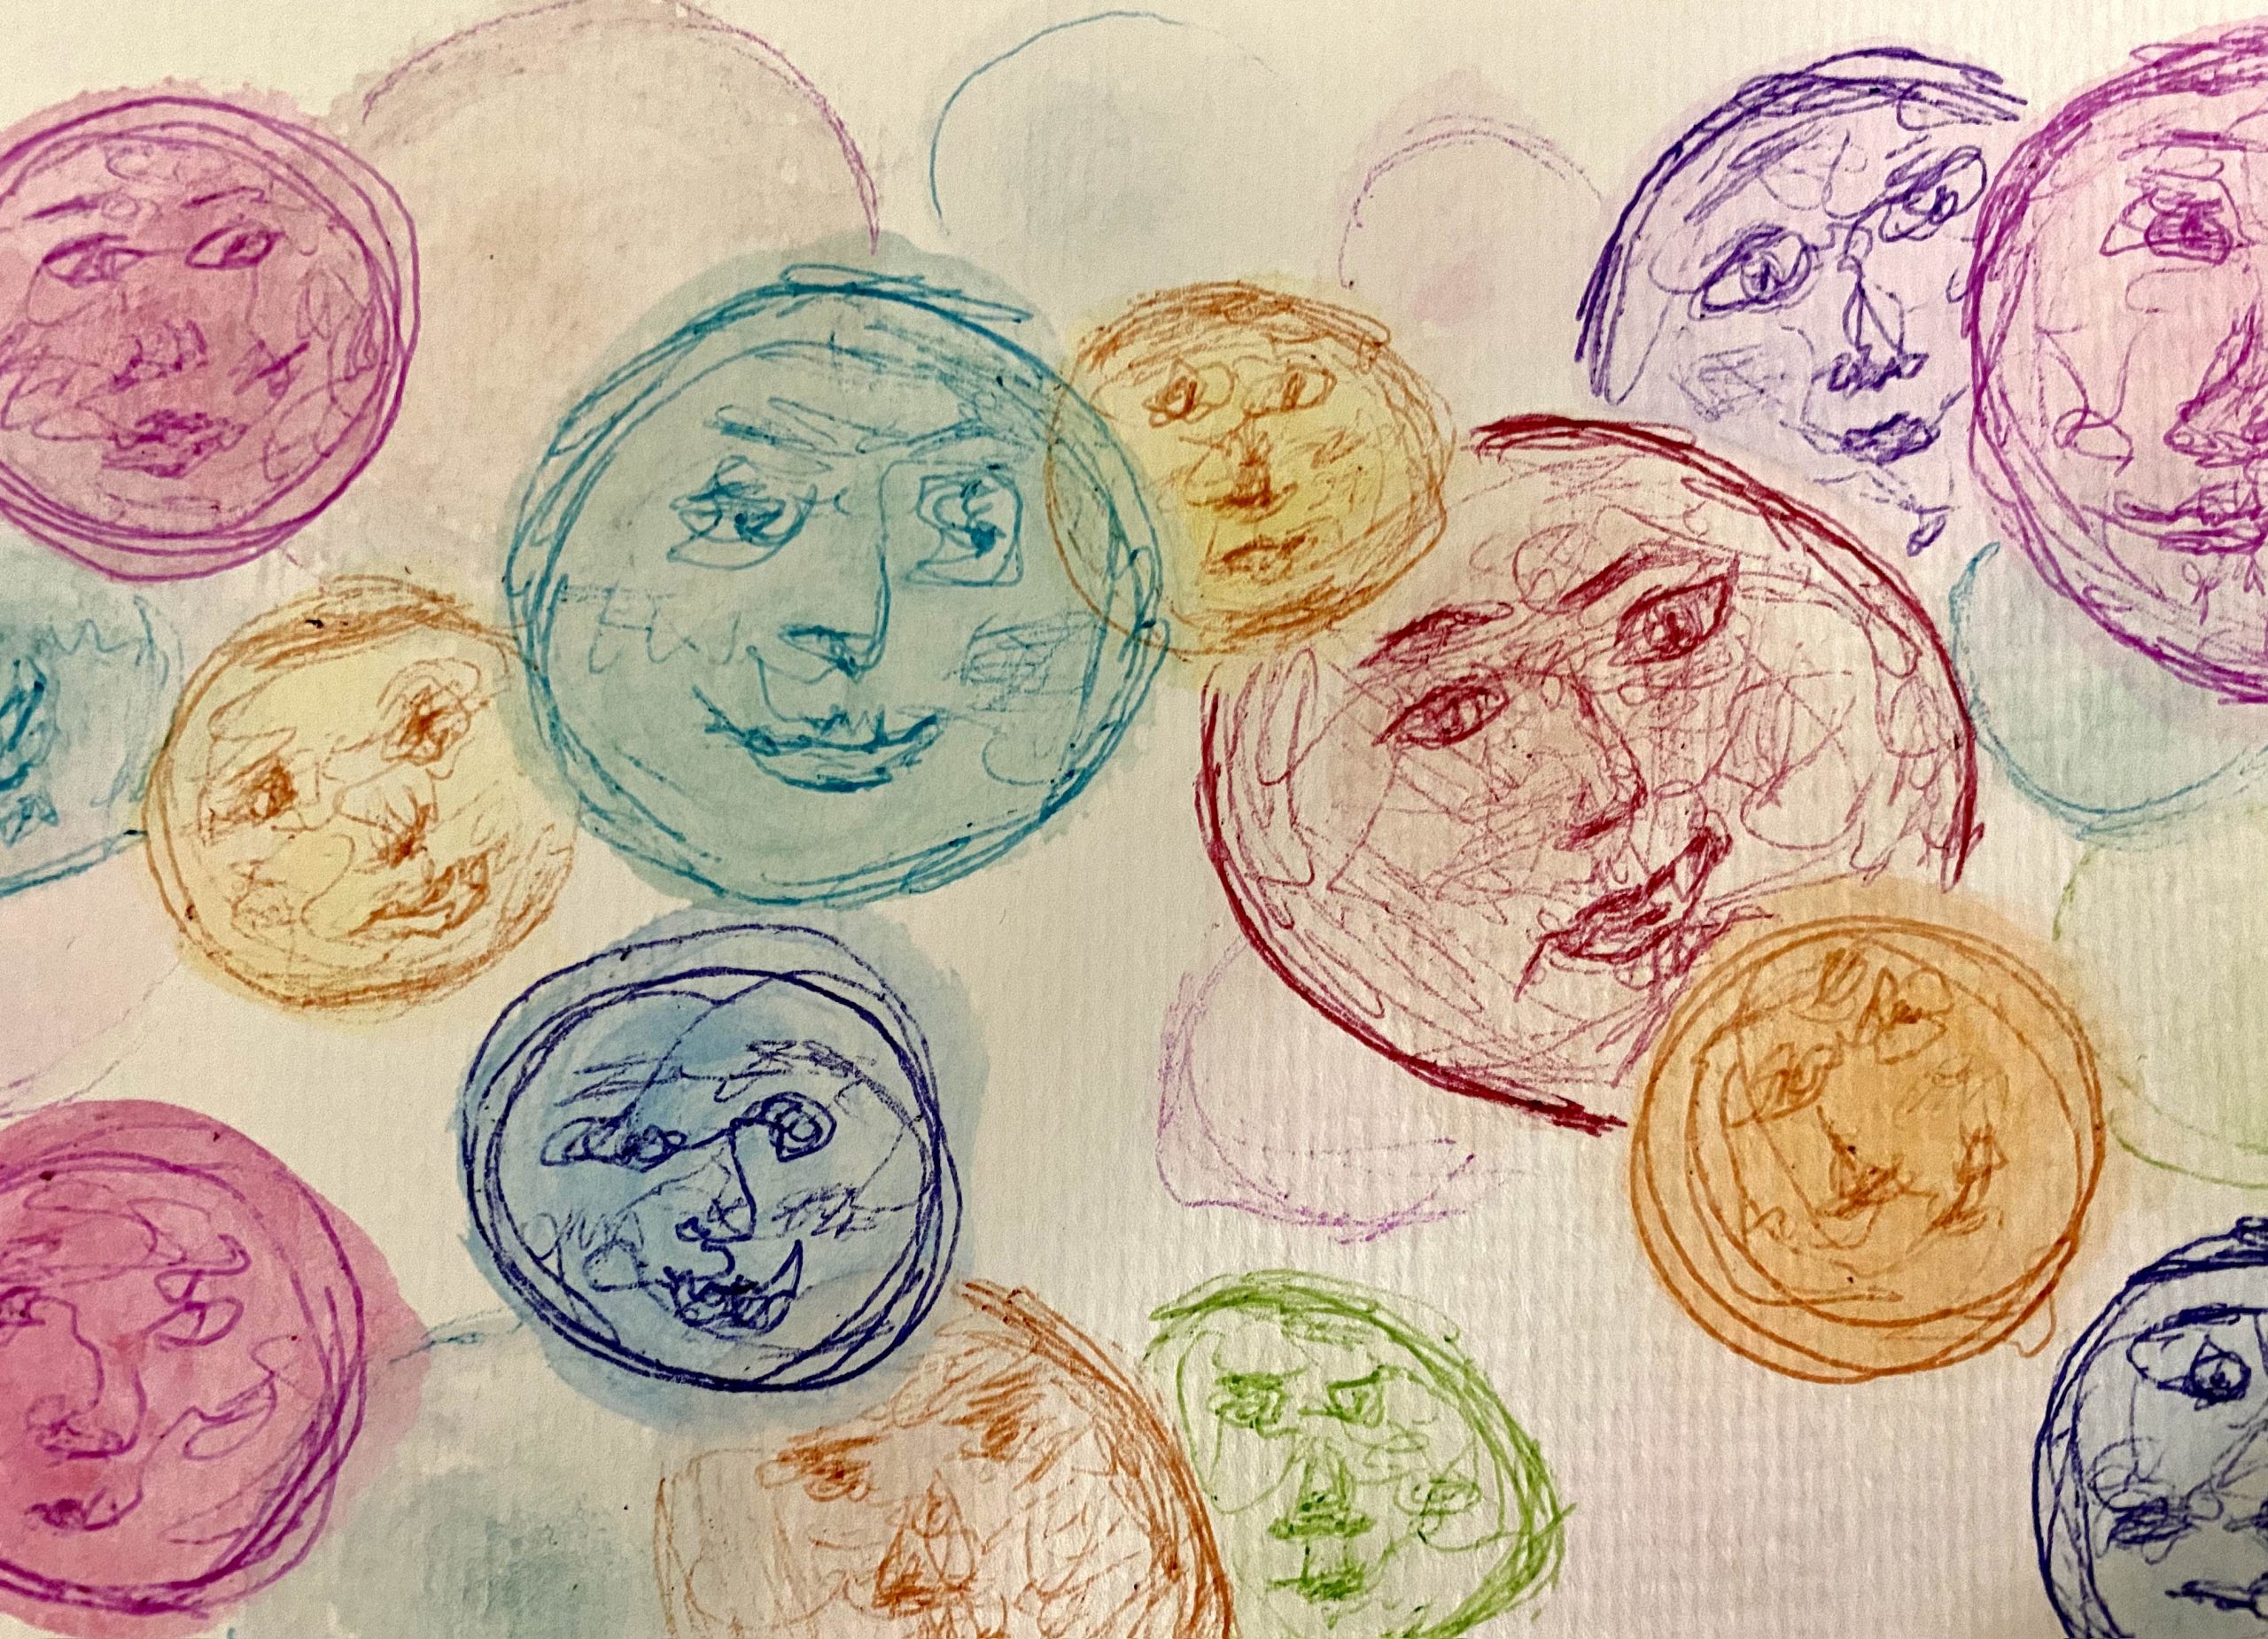 Drawing/Illustration.<br />
Sketches of Faces on colored circles. Multiple pen-sketched circles with plain faces, all of various colors. Not all circles have faces and they are all of different sizes.